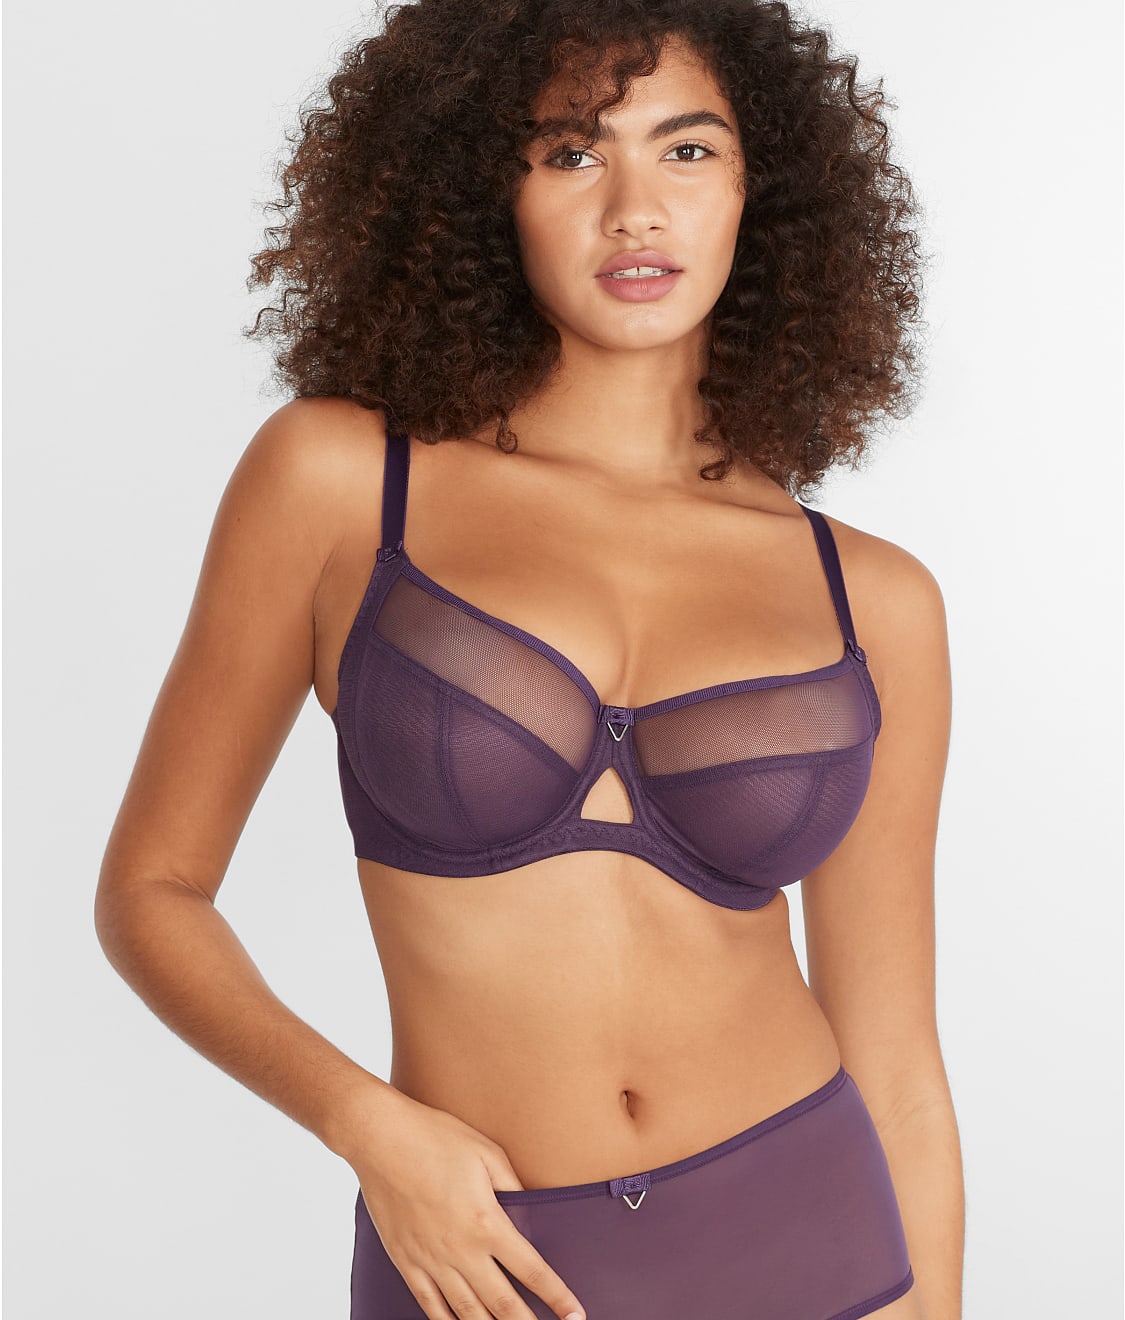 Limited time price drops inside! SAVE on D+ bras - Curvy Kate